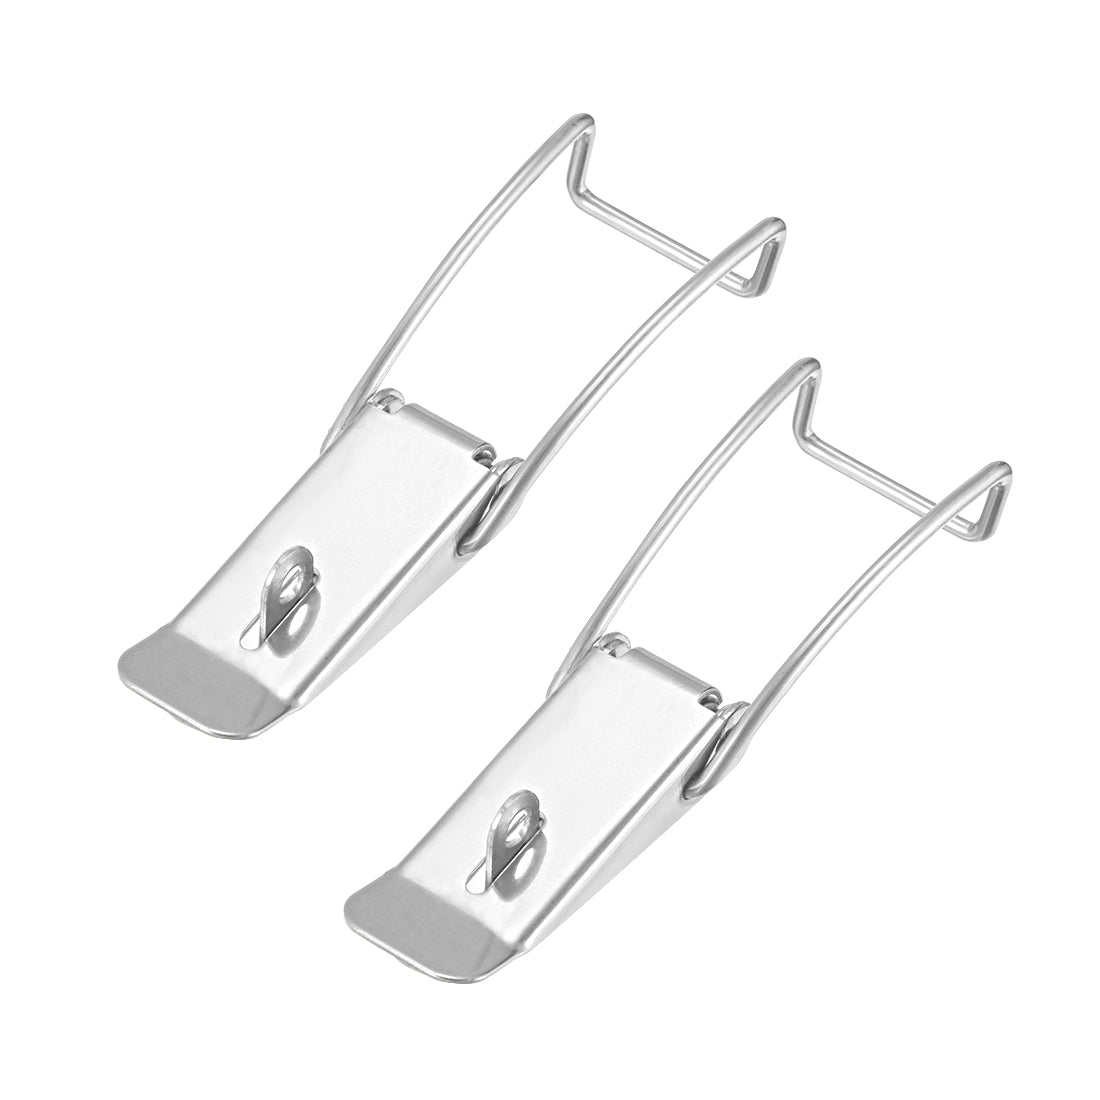 uxcell Uxcell 2 Pcs Iron Spring Loaded Toggle Case Box Chest Trunk Latch Catches Hasps Clamps, 118.5mm Length